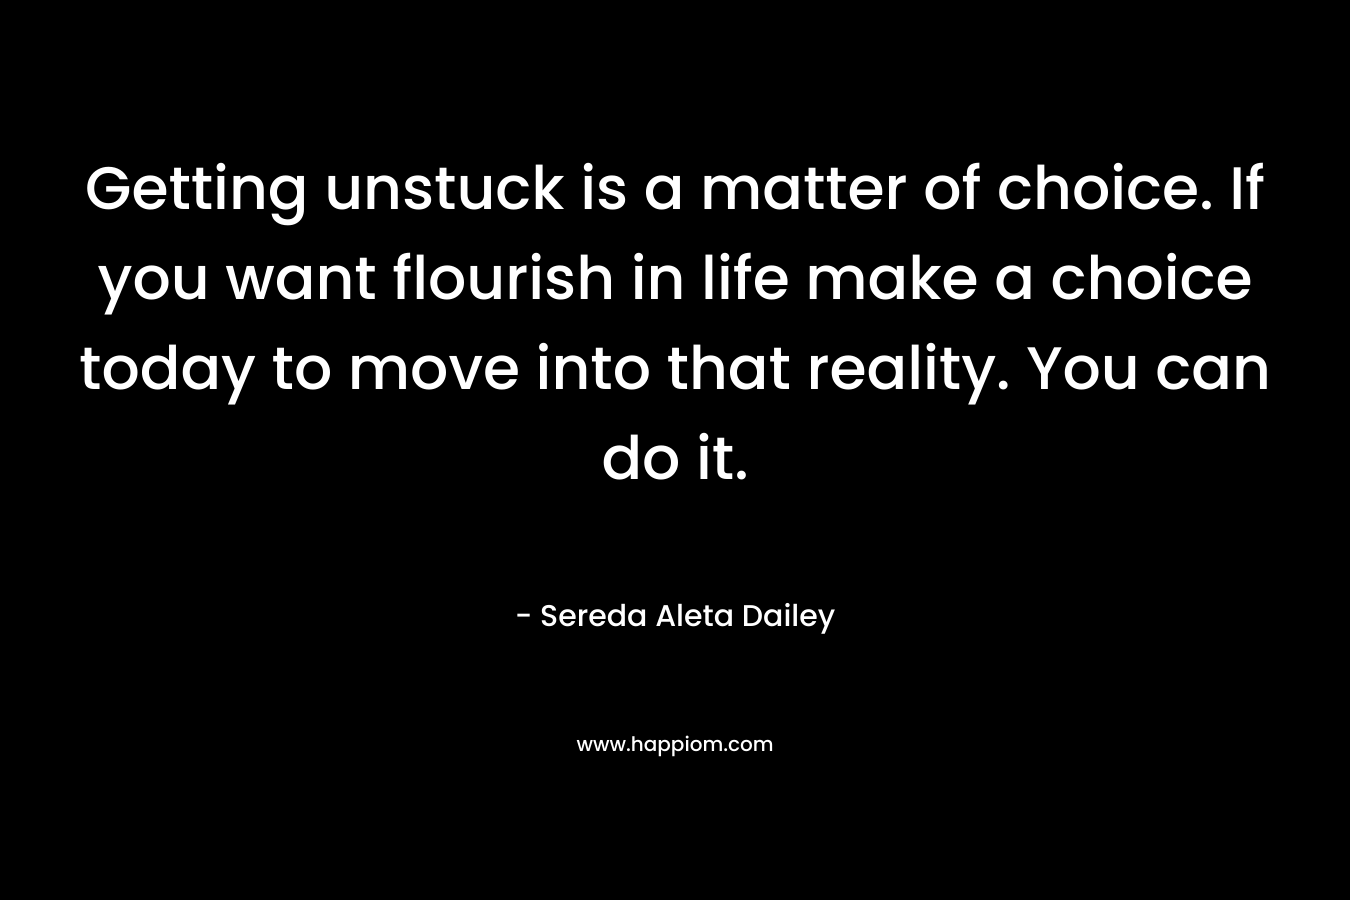 Getting unstuck is a matter of choice. If you want flourish in life make a choice today to move into that reality. You can do it. – Sereda Aleta Dailey